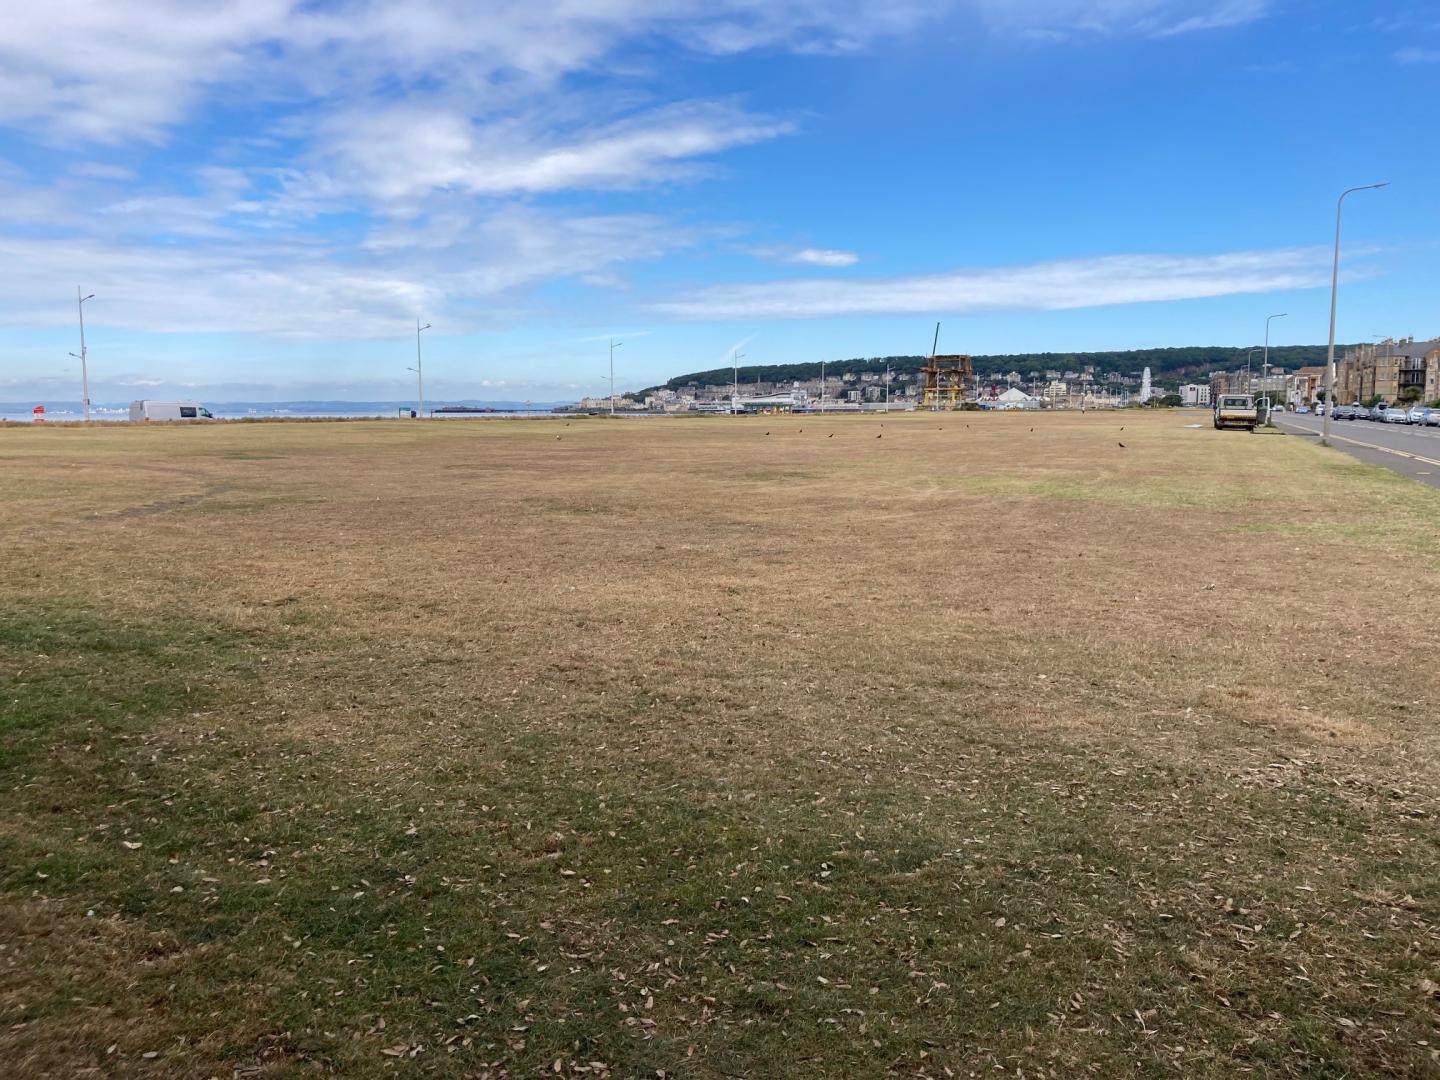 A photo of the Beach Lawns in Weston-super-Mare taken in August 2022.